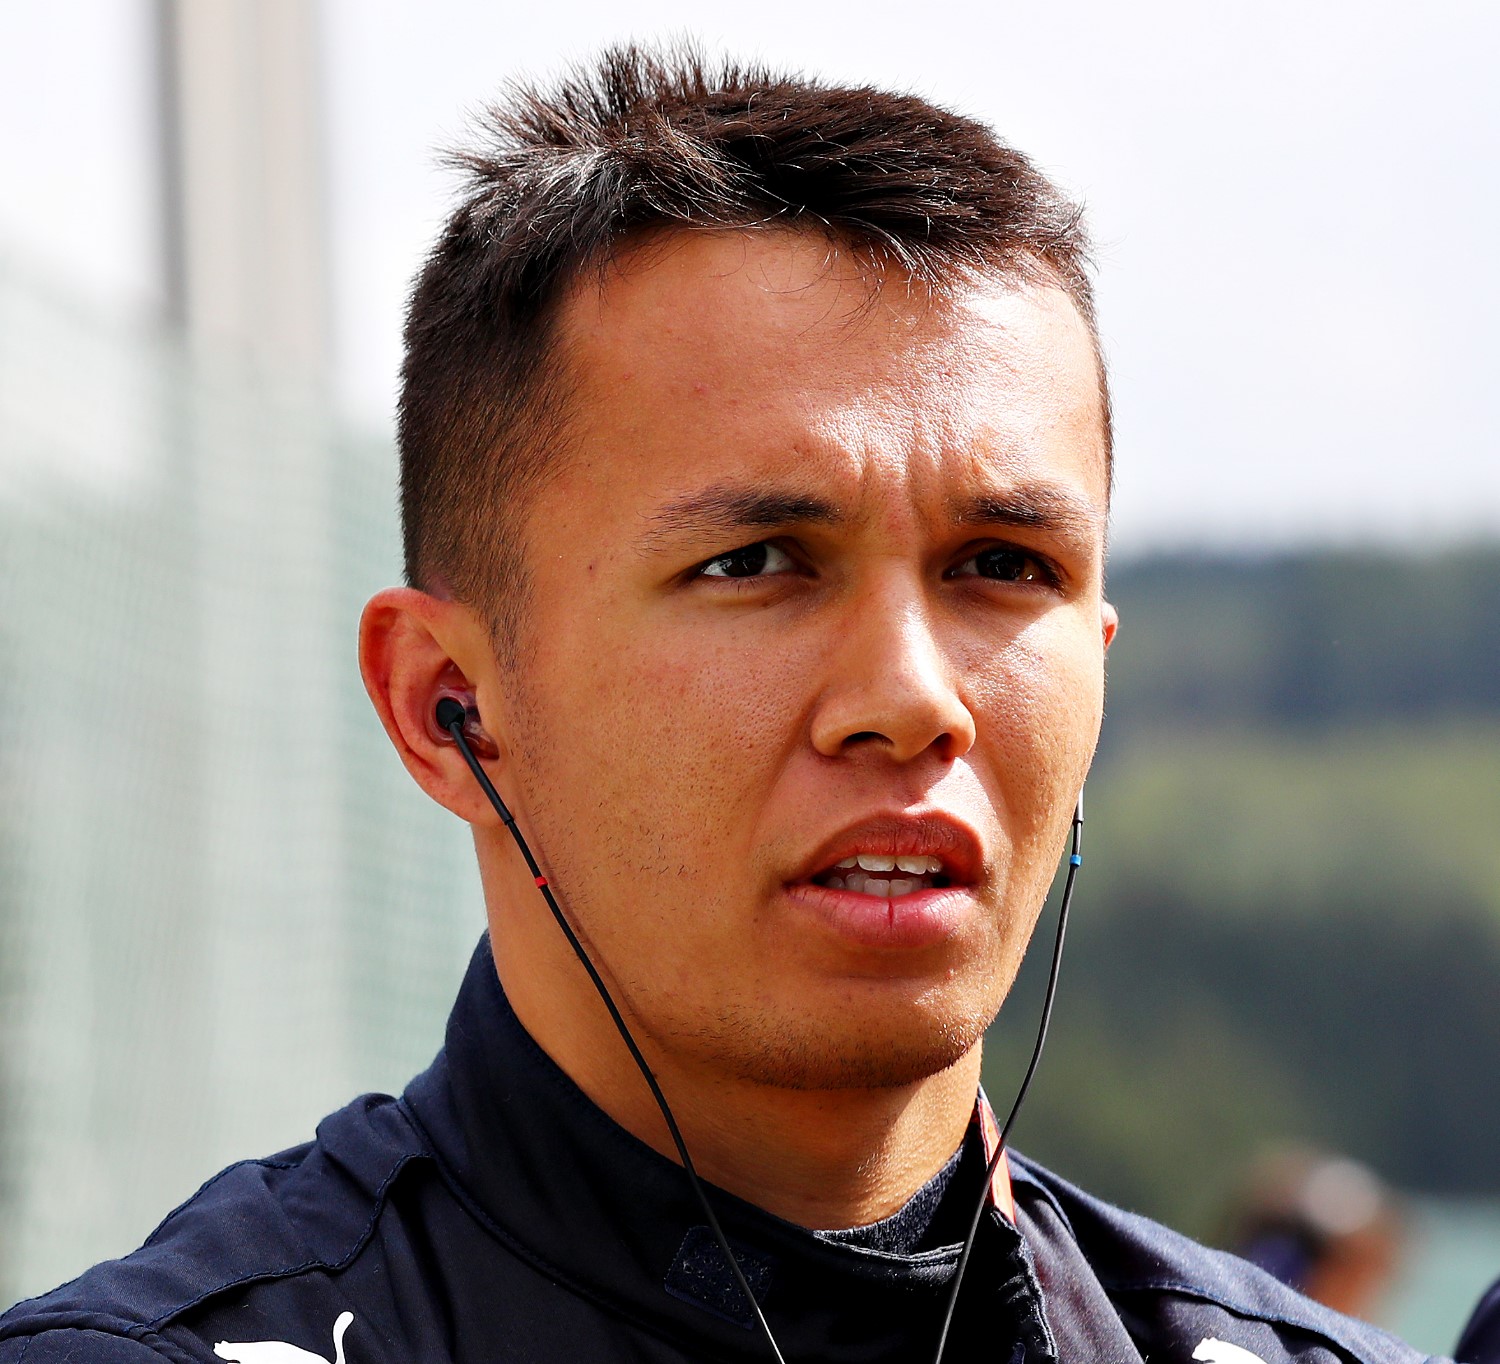 Albon thoroughly defeated by his teammate.  However, he buys his ride and Red Bull loves cashing his check